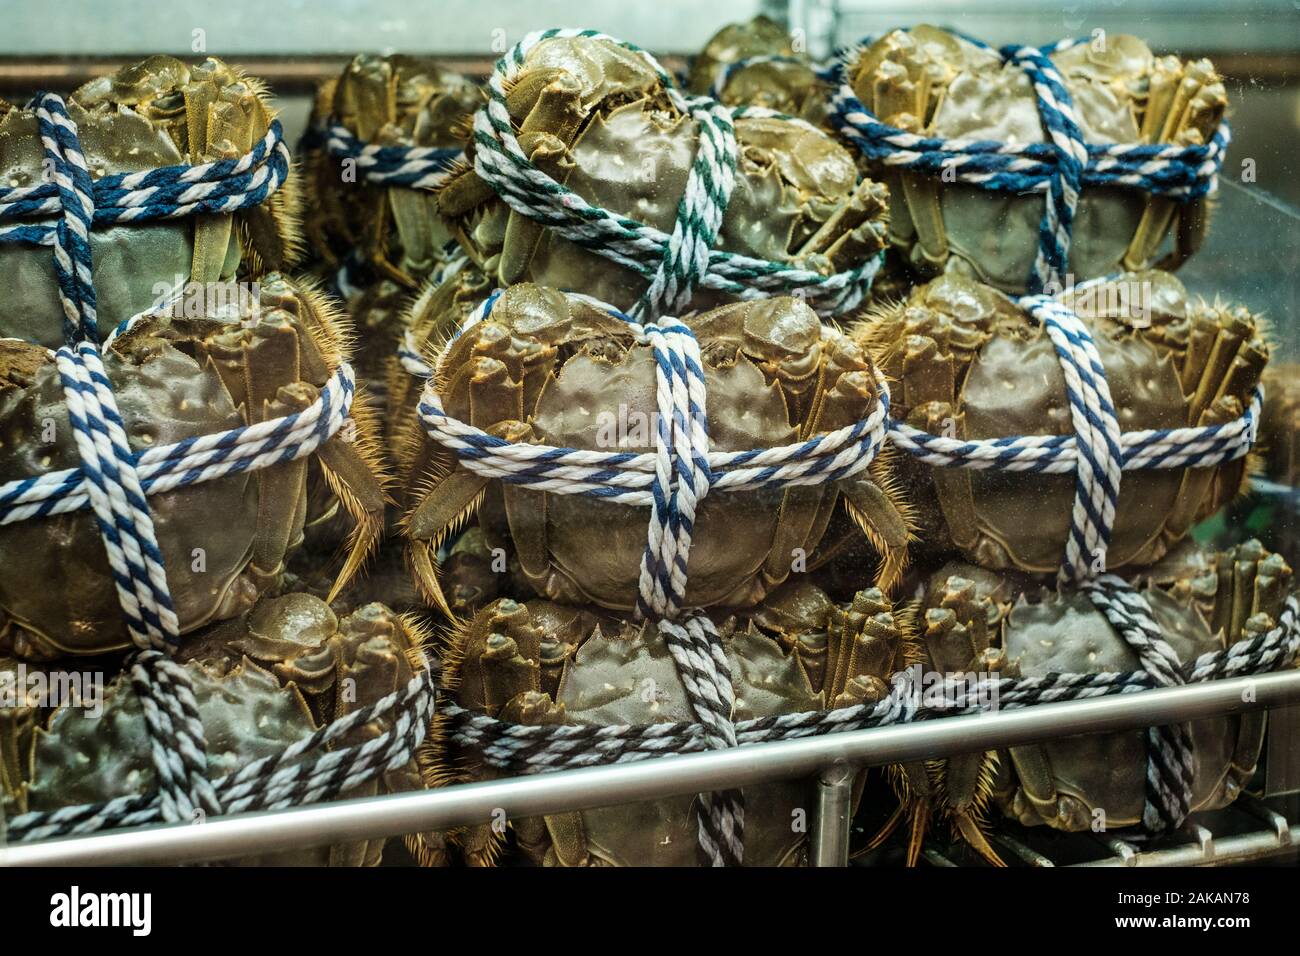 Hairy crabs for sale on fish market, Hongkong Stock Photo